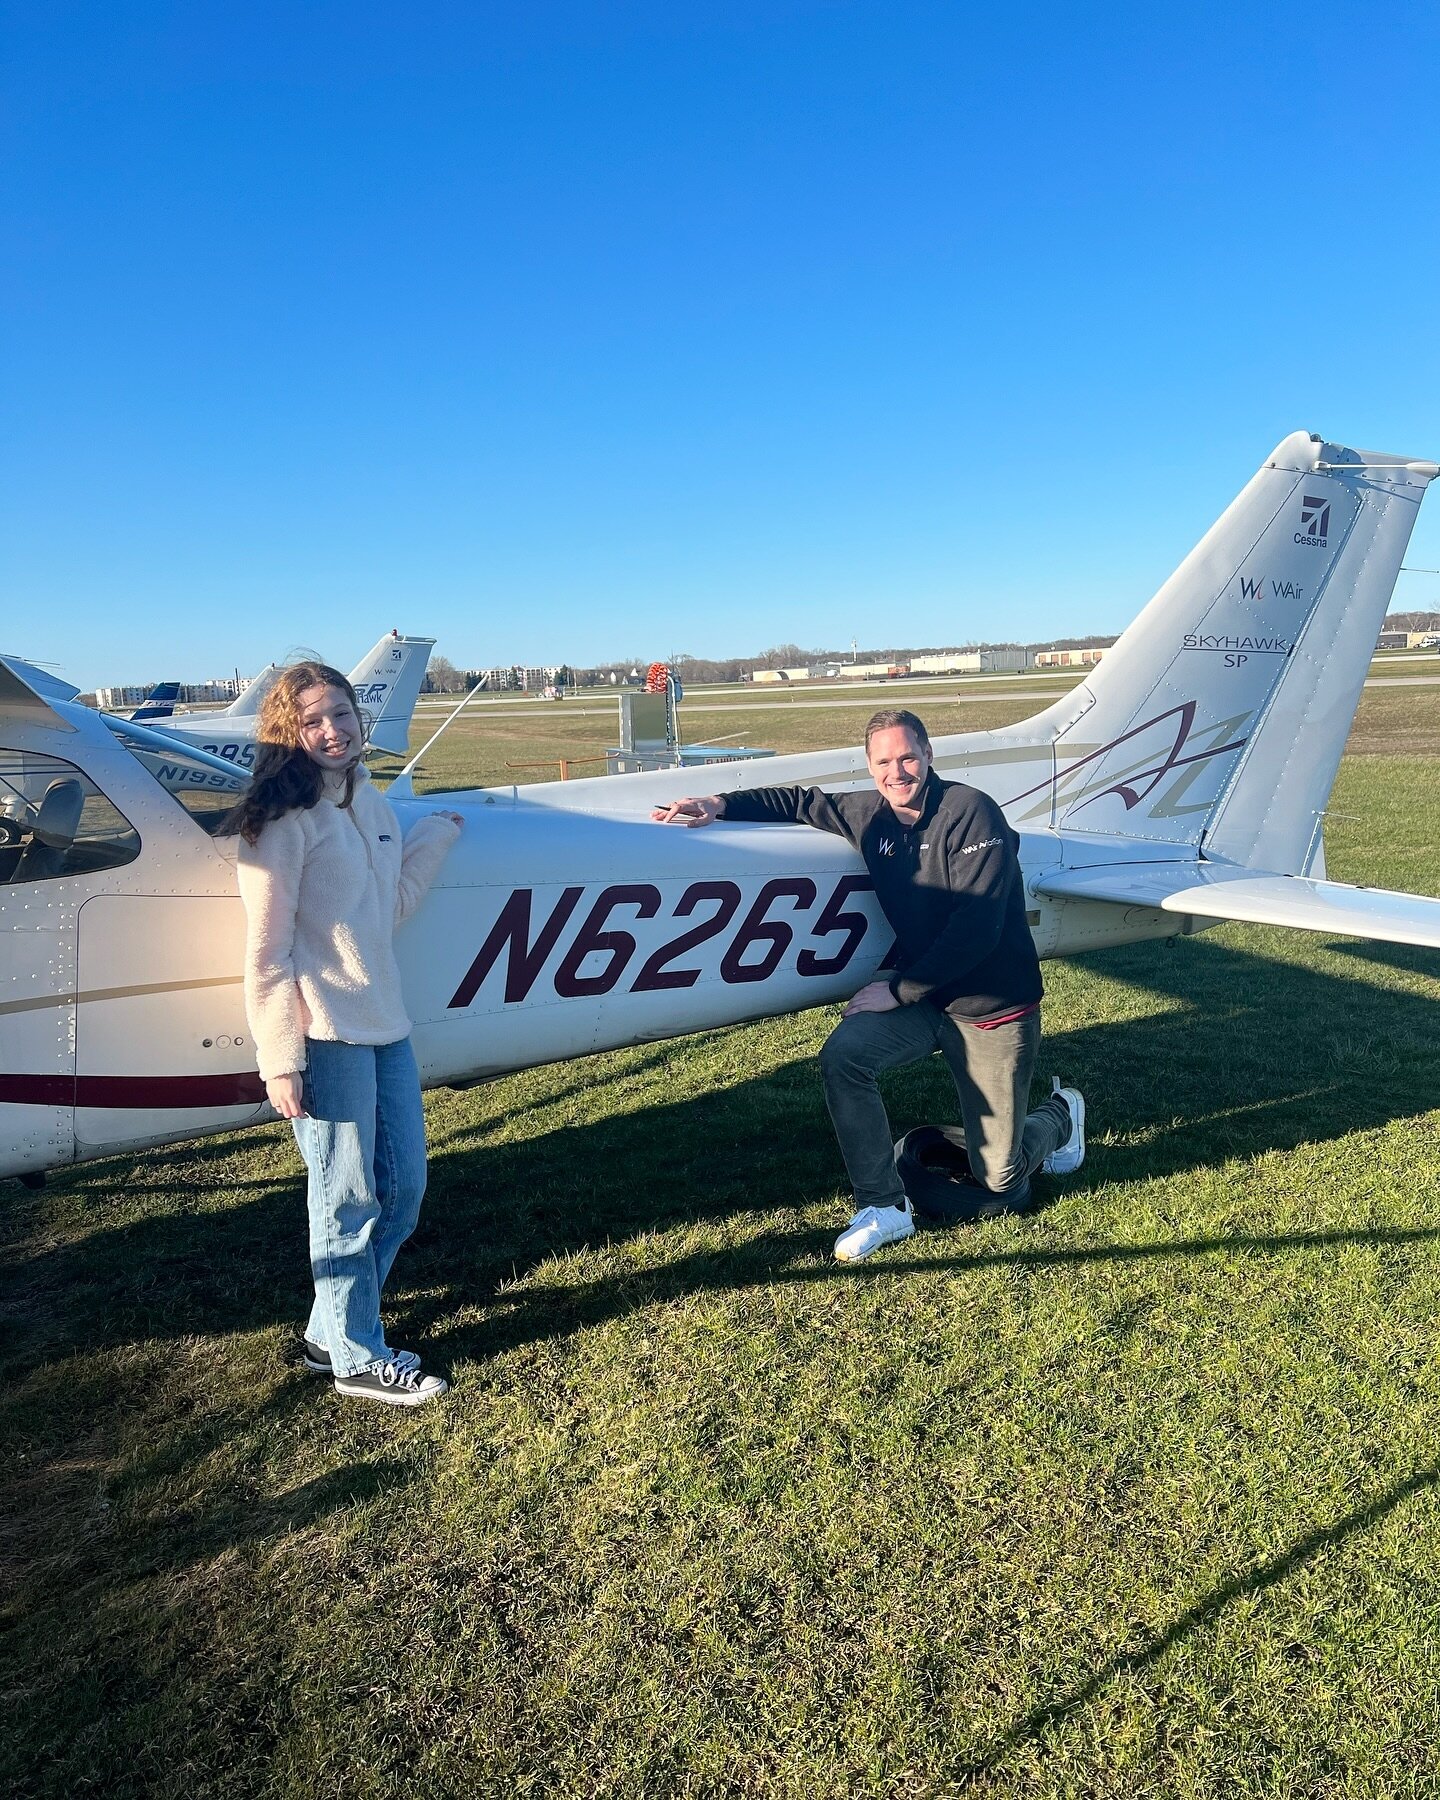 Congratulations to Maeve who just passed her check ride to receive her Private Pilot License! 🥳🙌🎉🥳
.
.
.
#privatepilot #flightschool #pilot #flighttraining